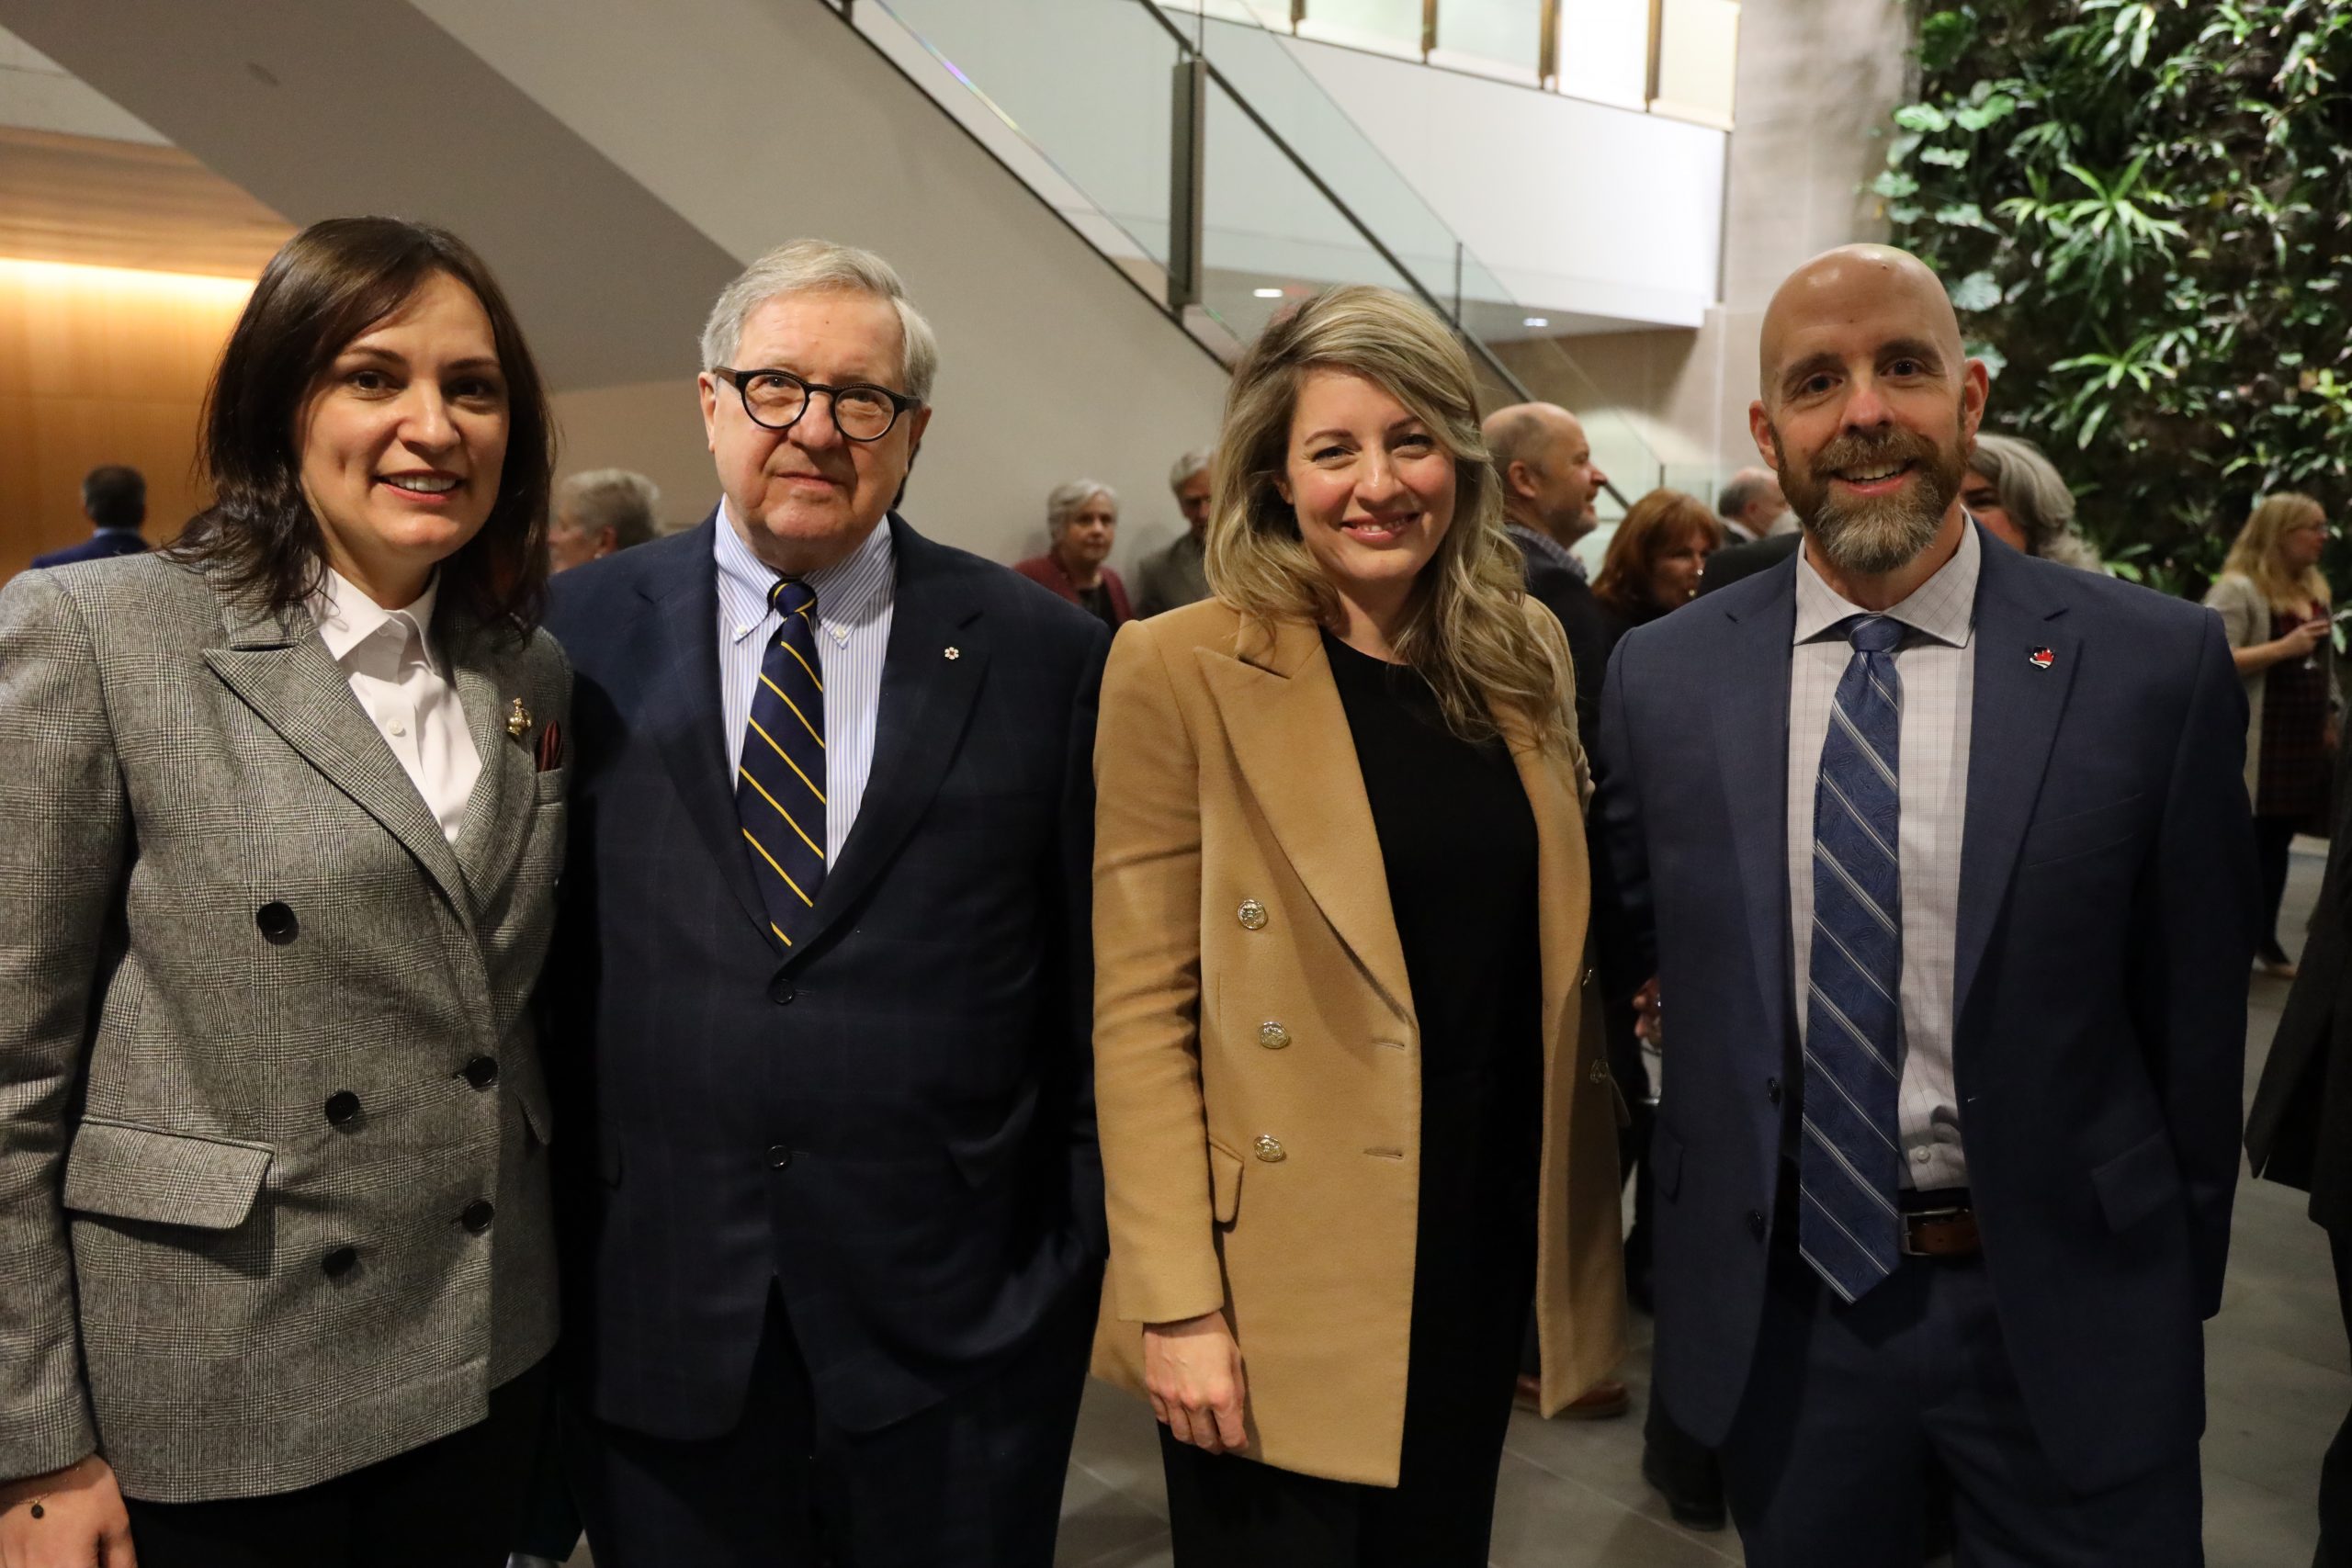 Yuliya Kovaliv (Ukraine's AMabassador to Canada), Lloyd Axworth (former Minister of Foreign Affairs), the Hon. Mélanie Joly (Minister of Foreign Affairs), and Benoit-Antoine Bacon (Carleton President and Vice-Chancellor). 